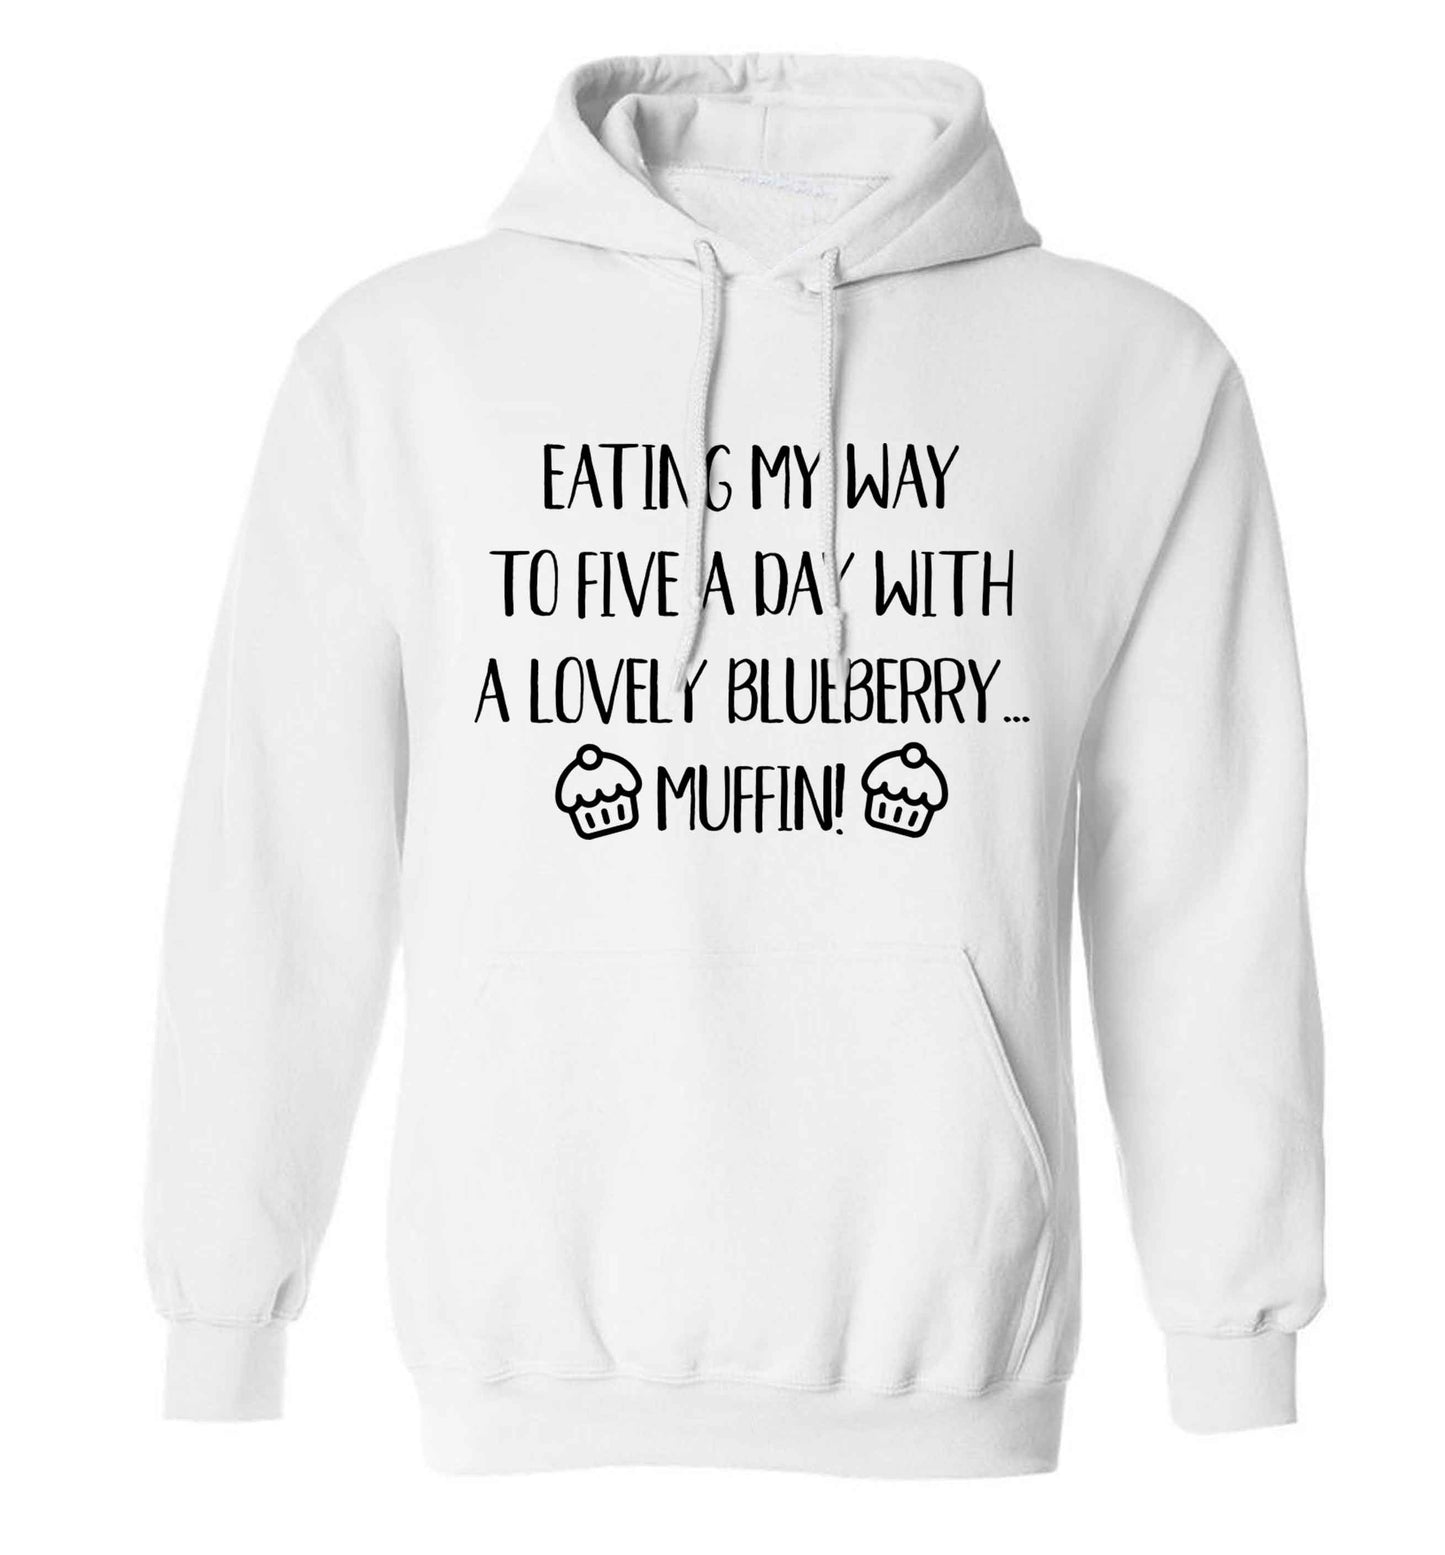 Eating my way to five a day with a lovely blueberry muffin adults unisex white hoodie 2XL